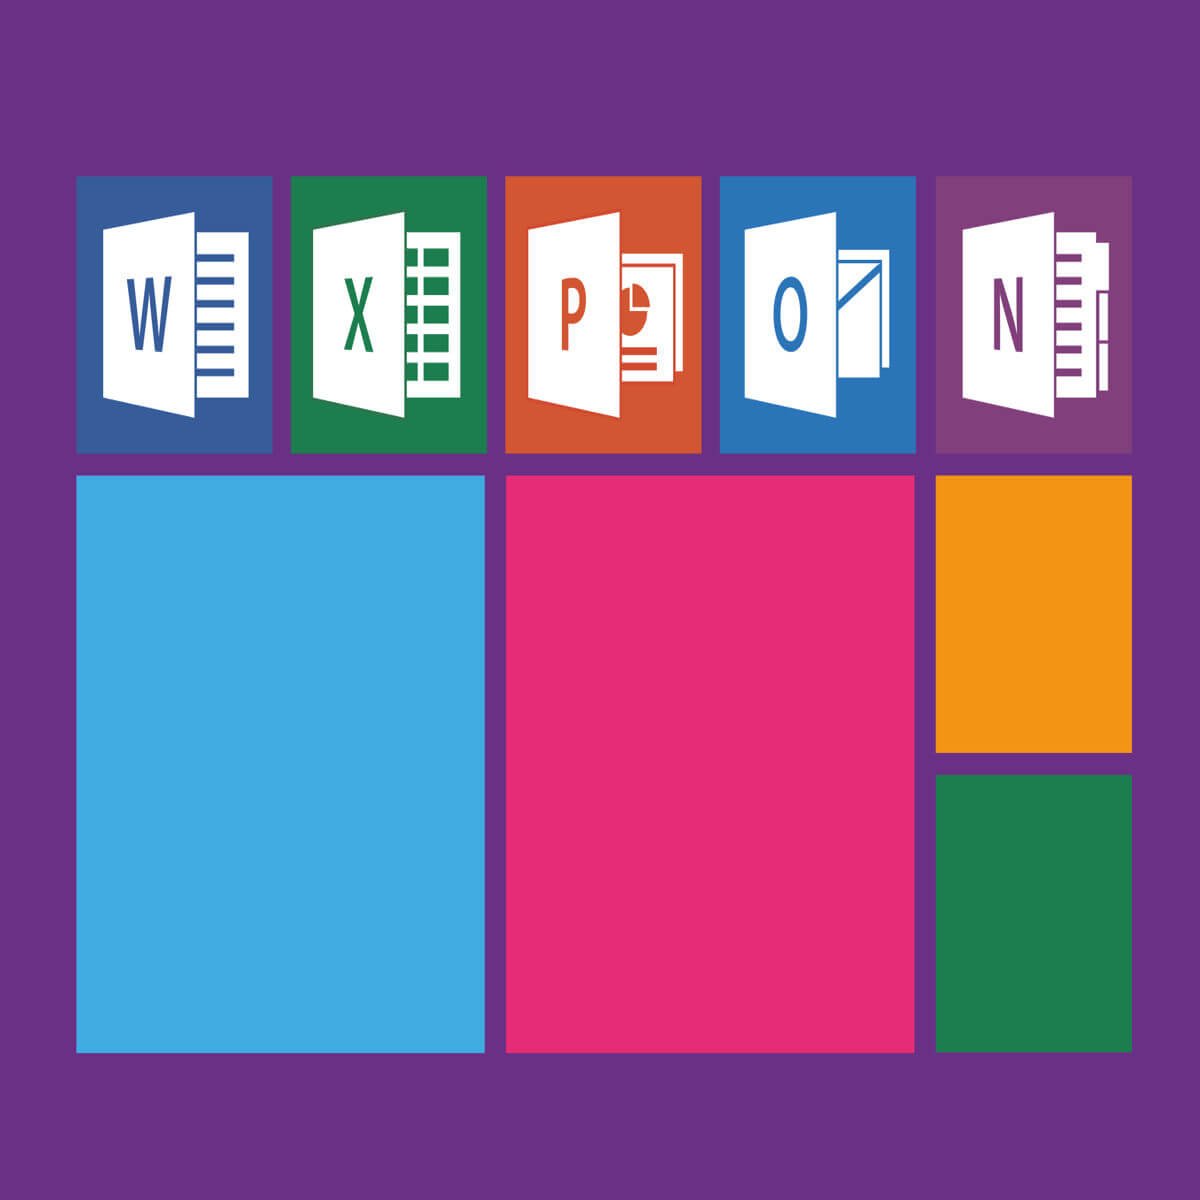 microsoft office 2019 update from 2016